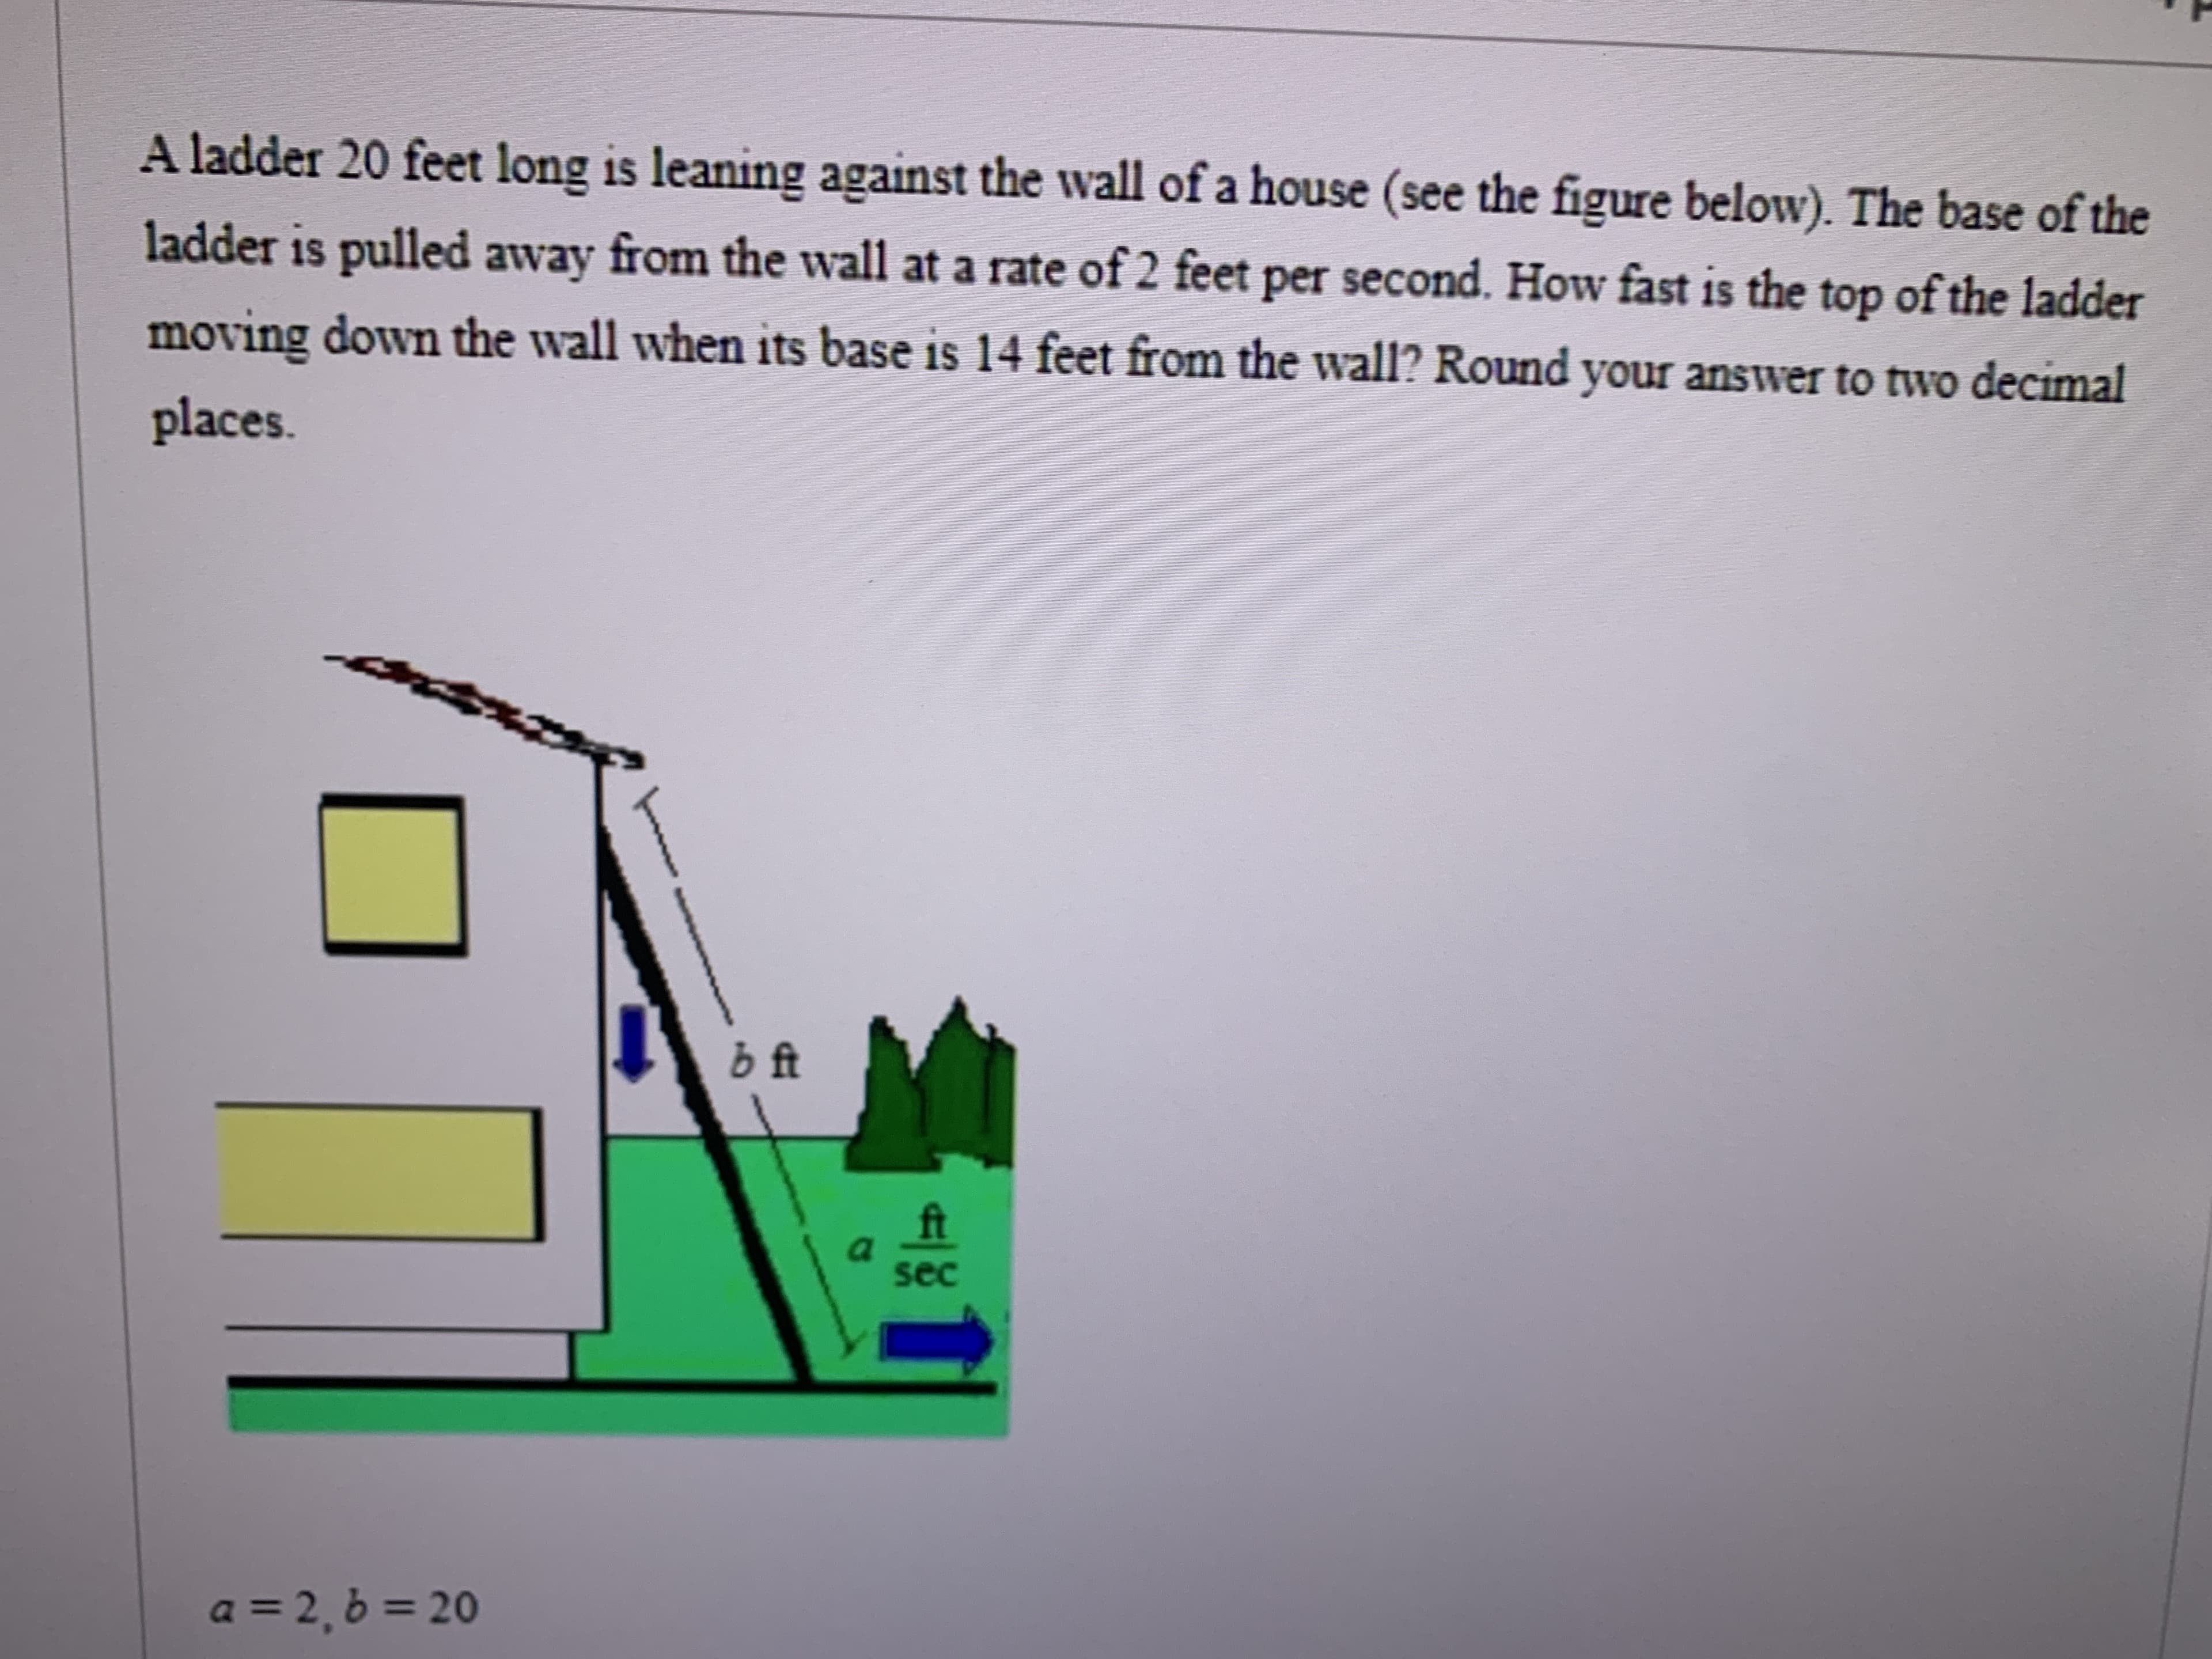 A ladder 20 feet long is leaning against the wall of a house (see the figure below). The base of the
ladder is pulled away from the wall at a rate of 2 feet per second. How fast is the top of the ladder
moving down the wall when its base is 14 feet from the wall? Round your answer to two decimal
places.
